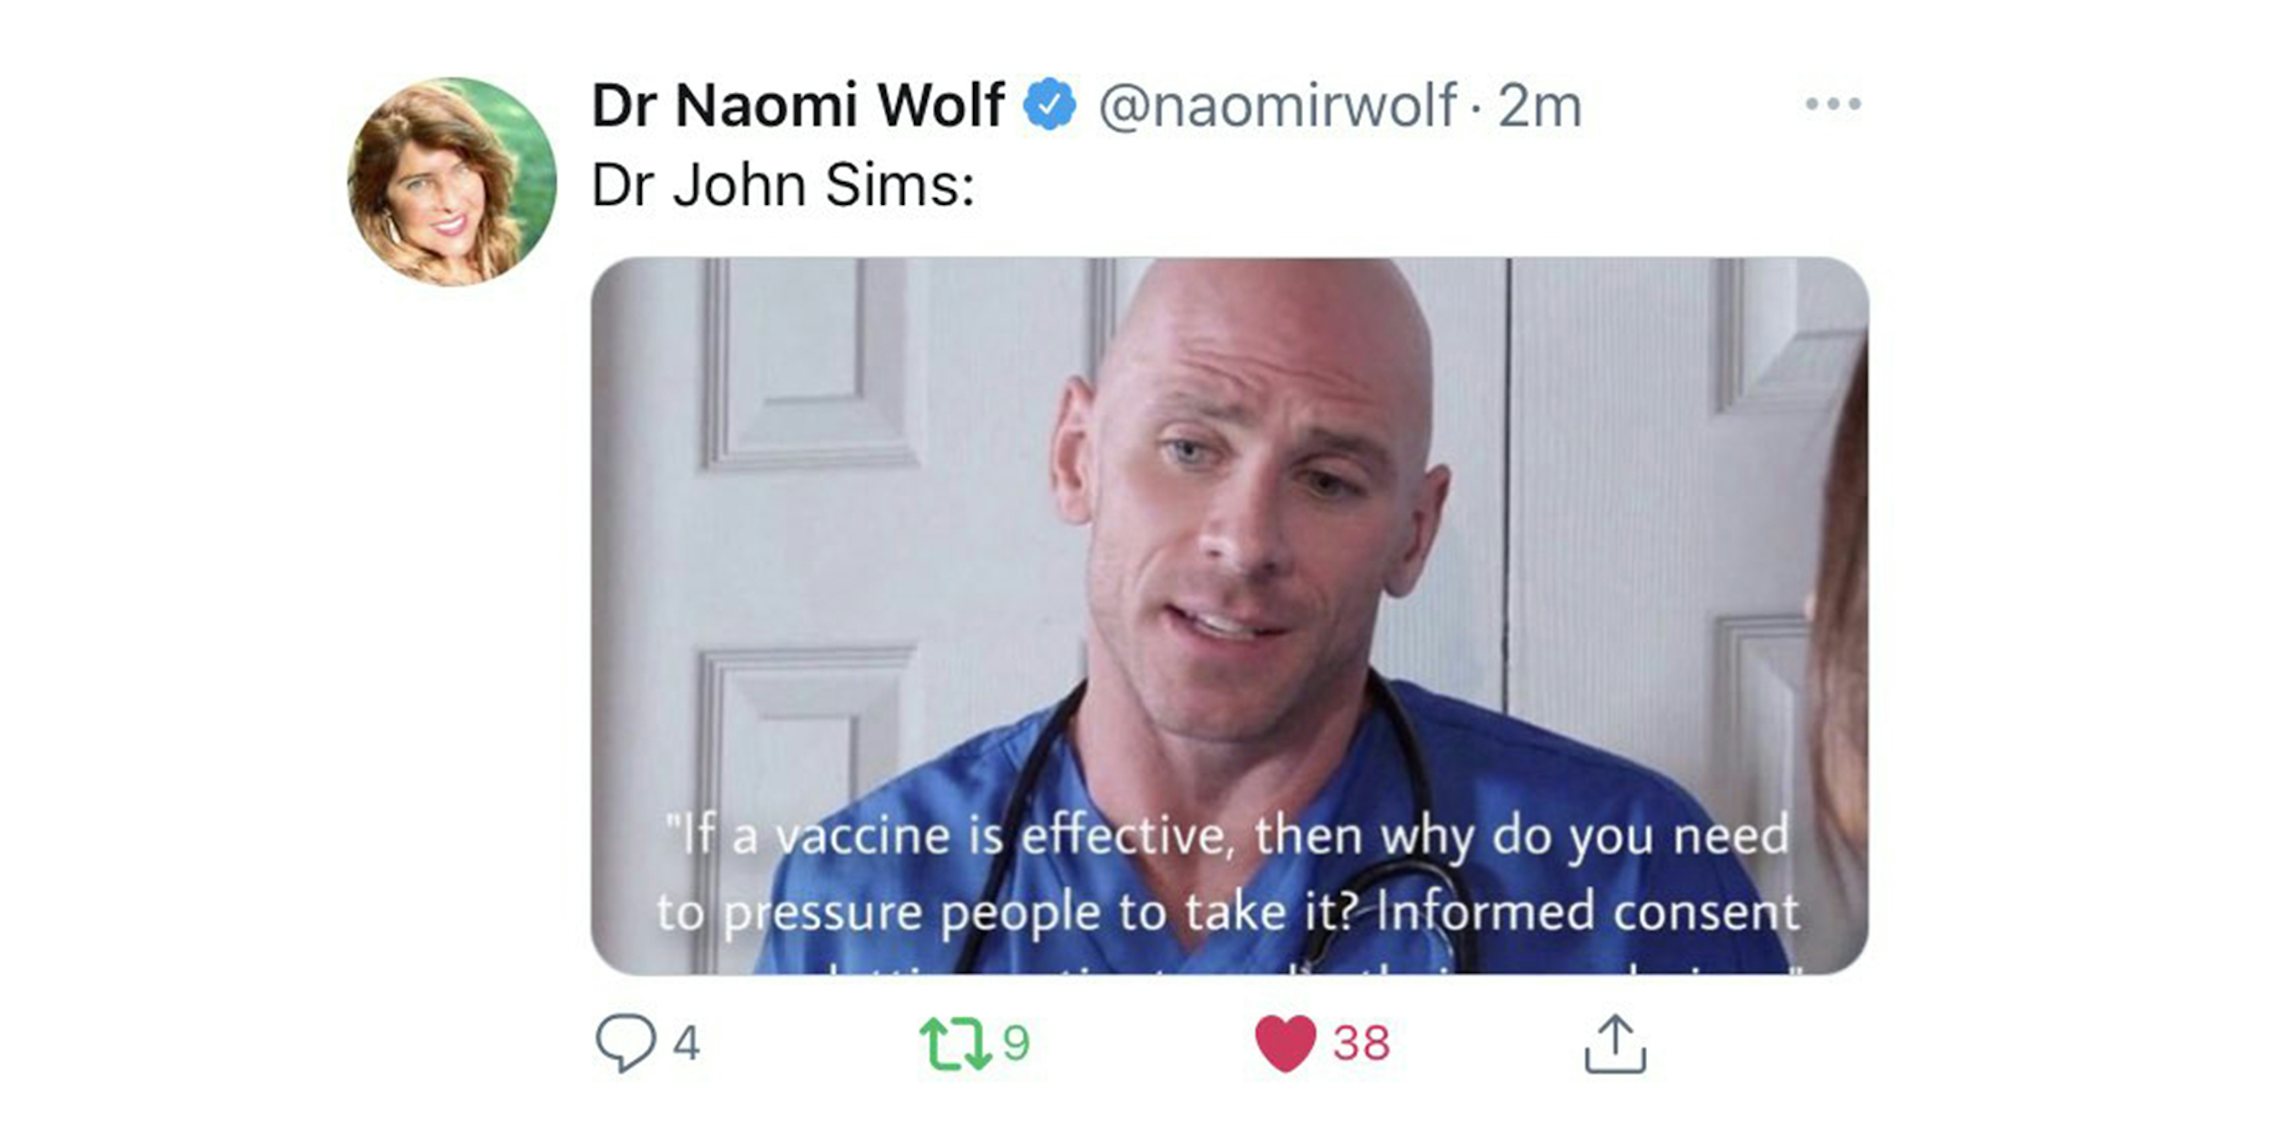 Xxx School Girls With Johnny Sins Com - Naomi Wolf Posted Fake Doctor's Quote from Porn Star Johnny Sins